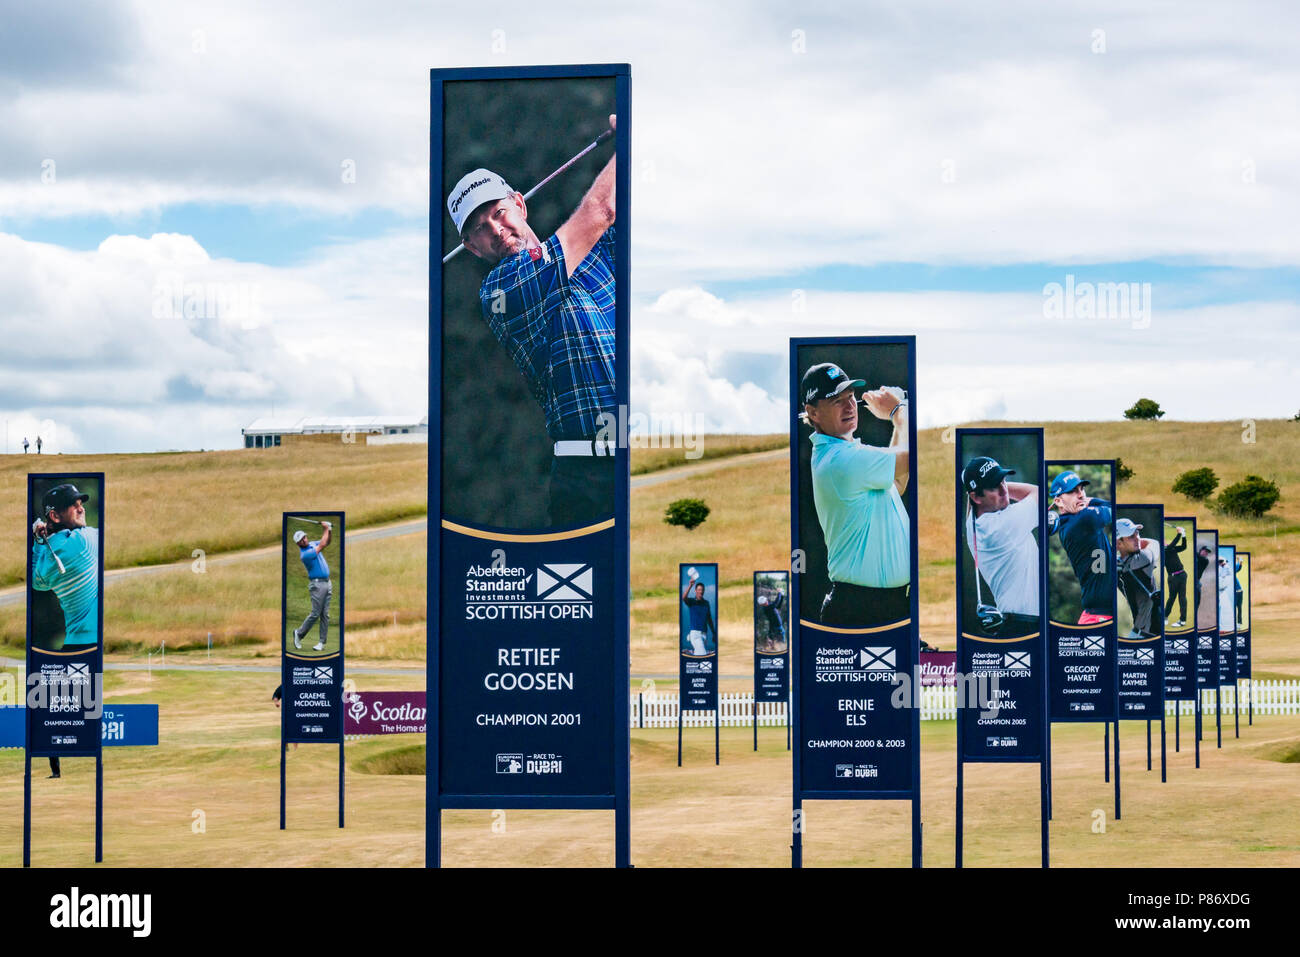 Aberdeen Standard Investments Scottish Open Golf Championship final preparations, East Lothian, Scotland, United 10th July 2018. The final stages of preparations in progress for the 5th European Rolex Series